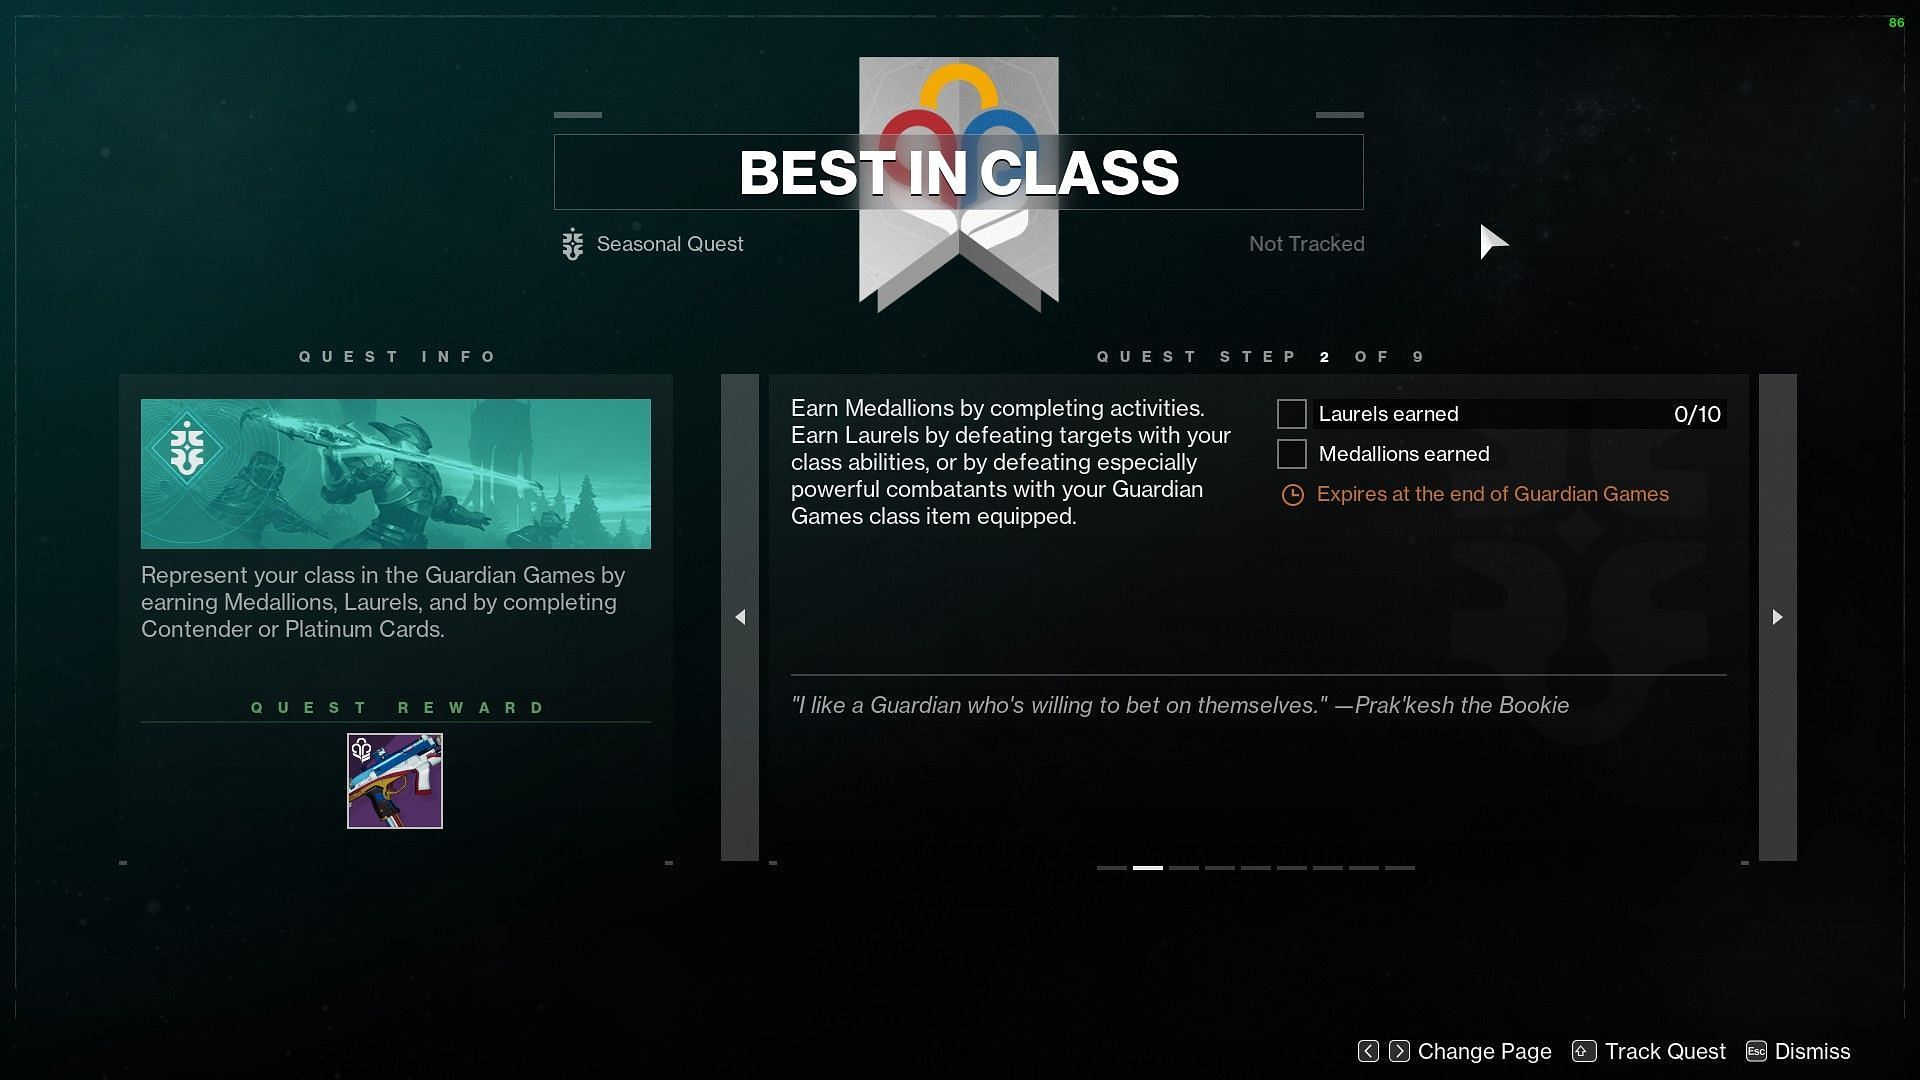 Best in Class step 2 of the main quest for The Title (Image via Destiny 2)